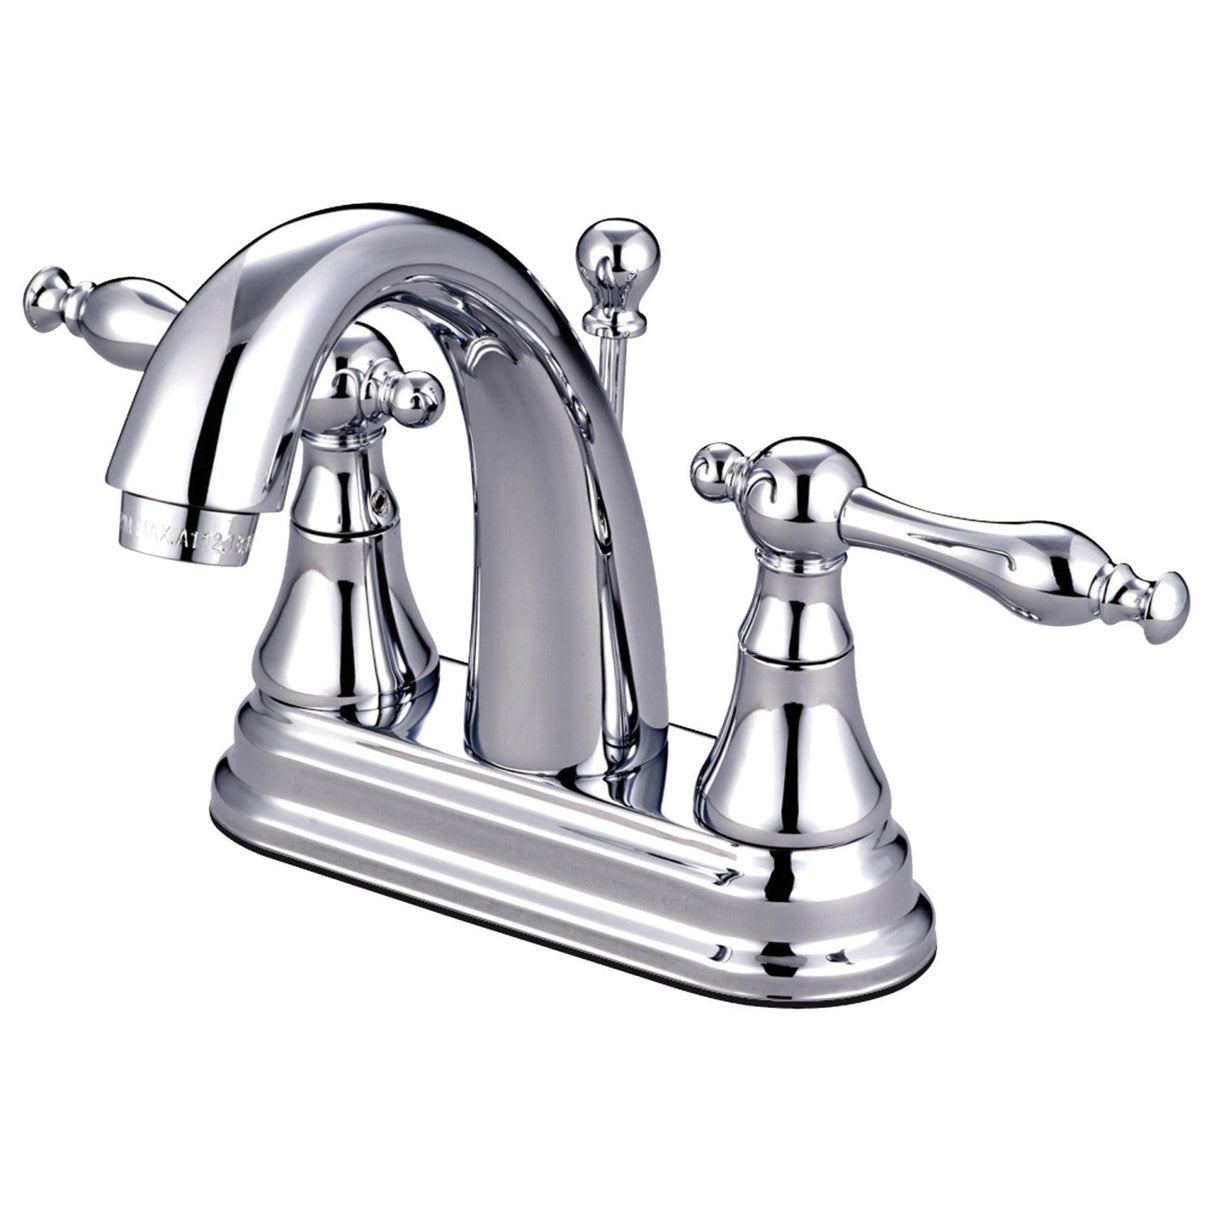 Normandy KS7611NL Two-Handle 3-Hole Deck Mount 4" Centerset Bathroom Faucet with Brass Pop-Up, Polished Chrome